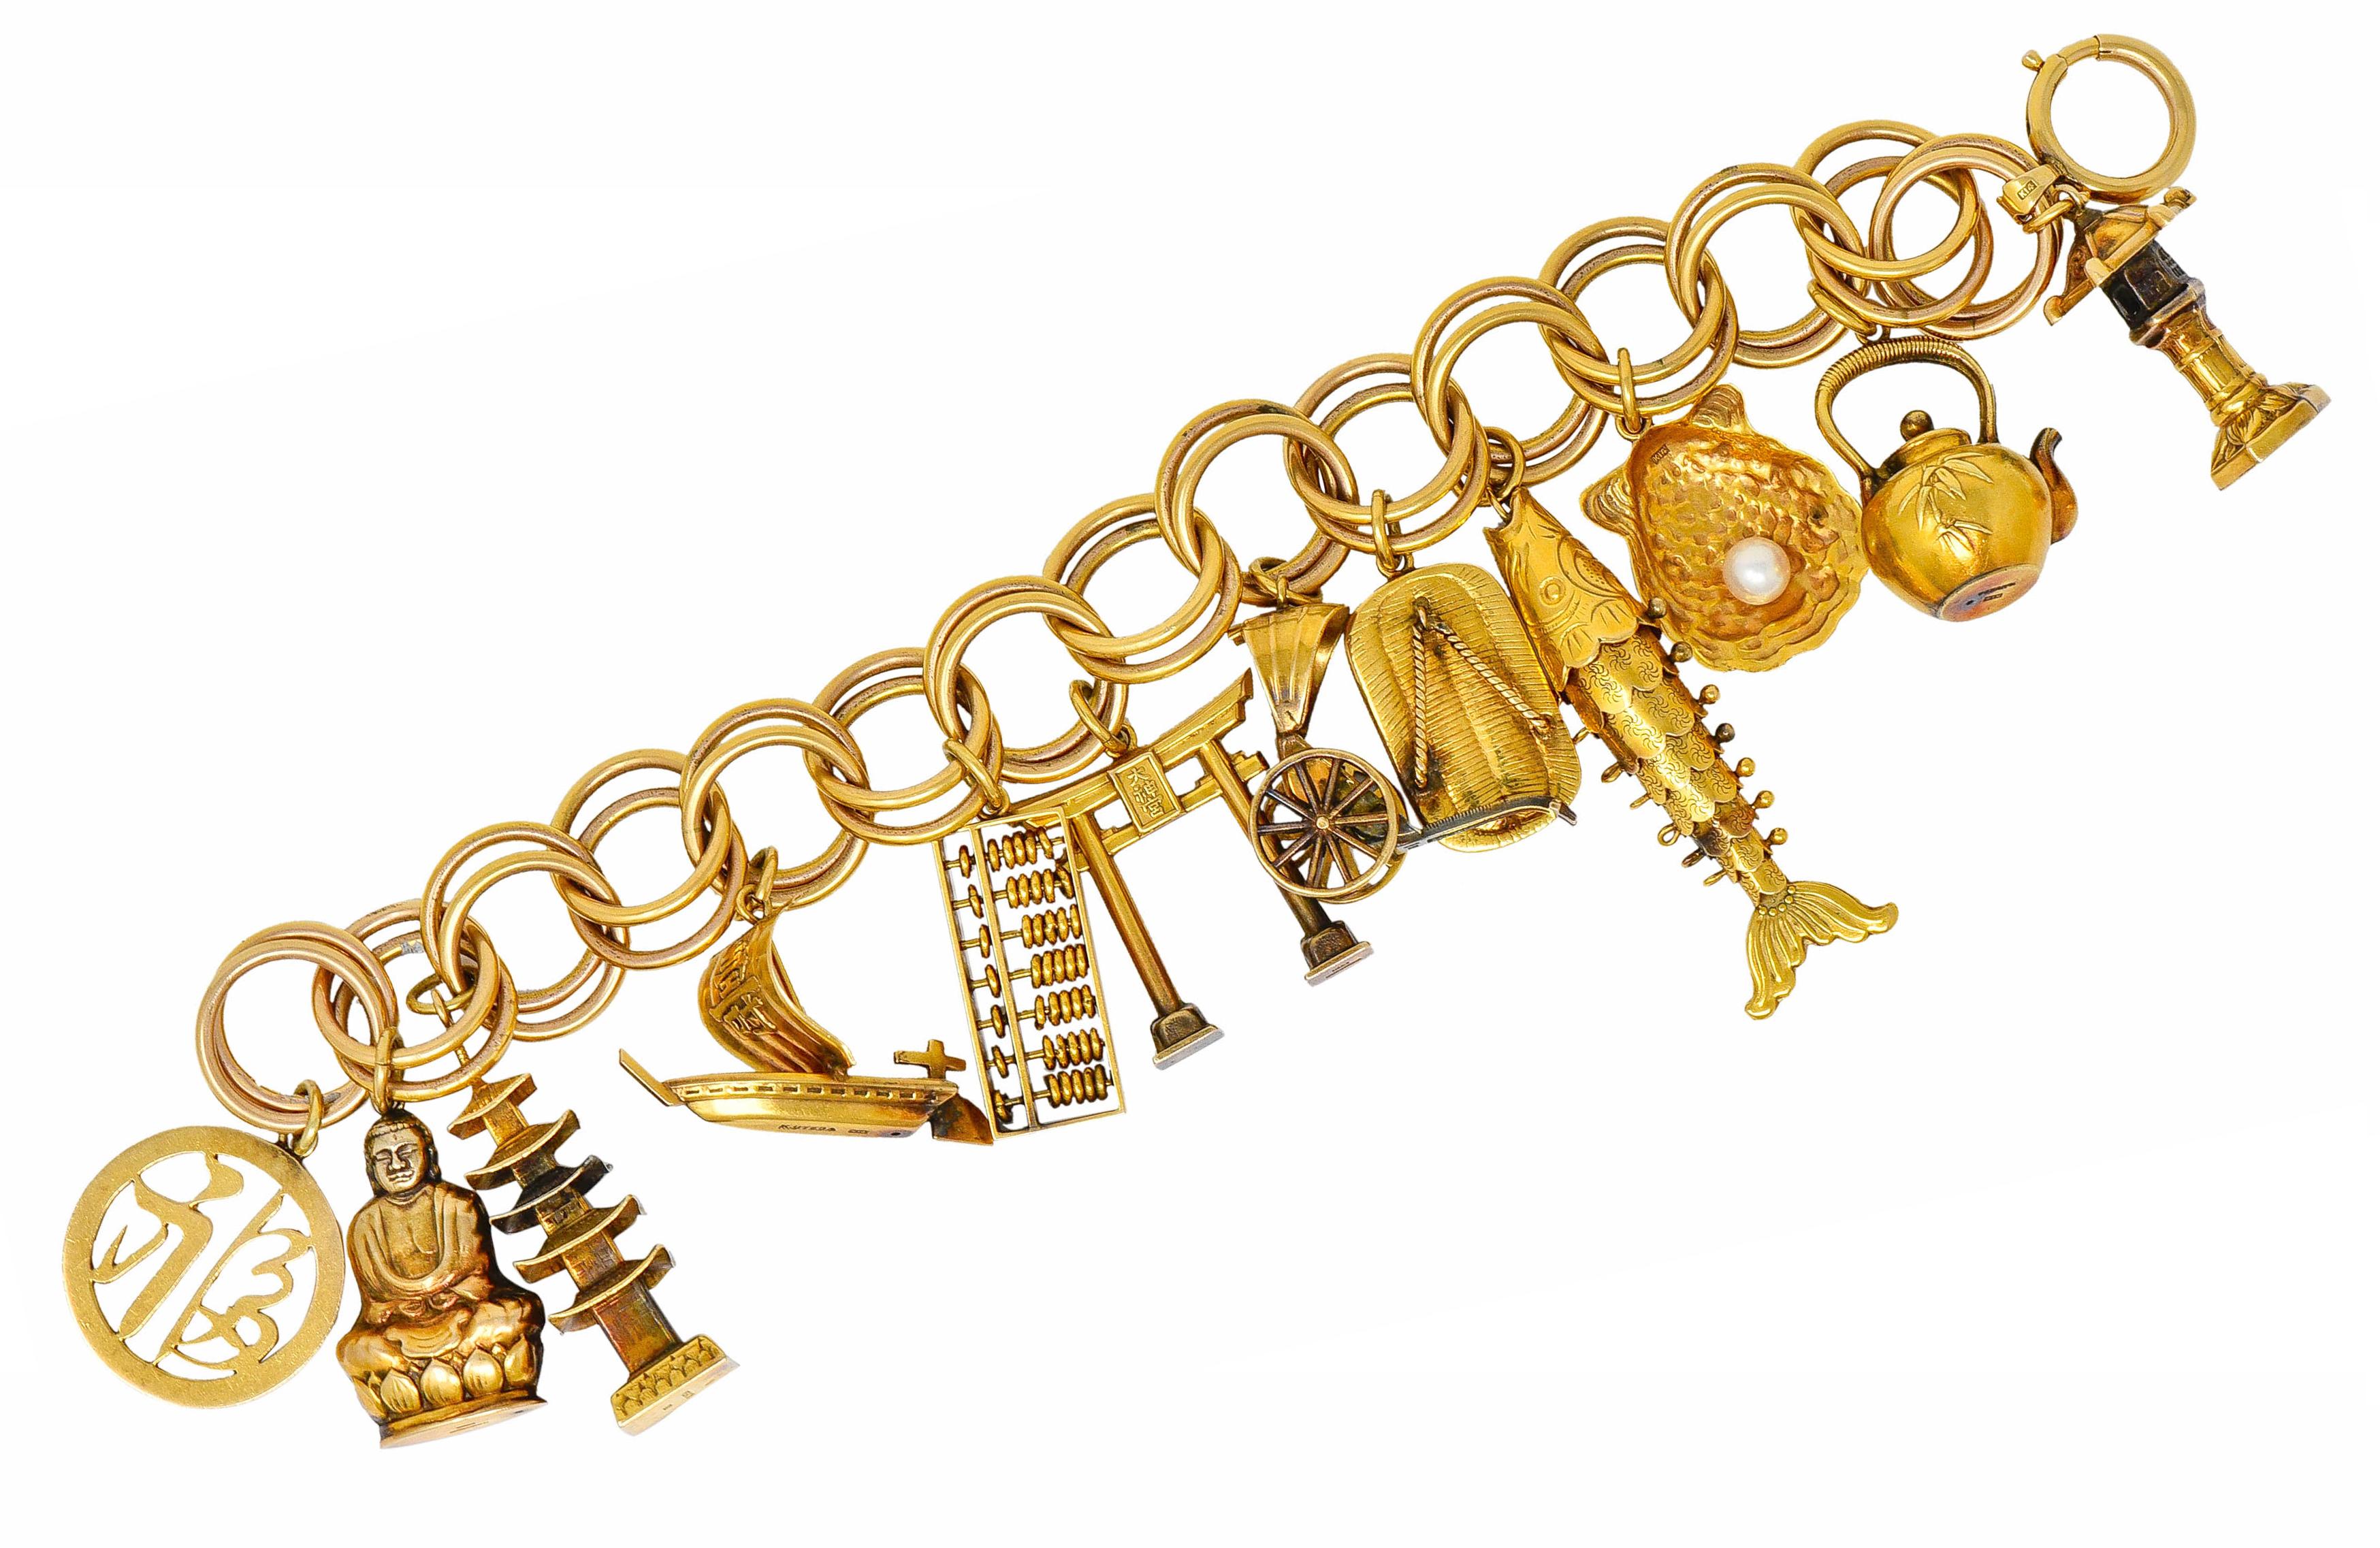 Charm bracelet is comprised of large round links, doubled

Suspending twelve large charms of Japanese icons

Circular character, Buddha, pagoda tower, wasen sailboat, abacus, Torii gate, rickshaw carriage, waraji sandal, articulated fish, shell with